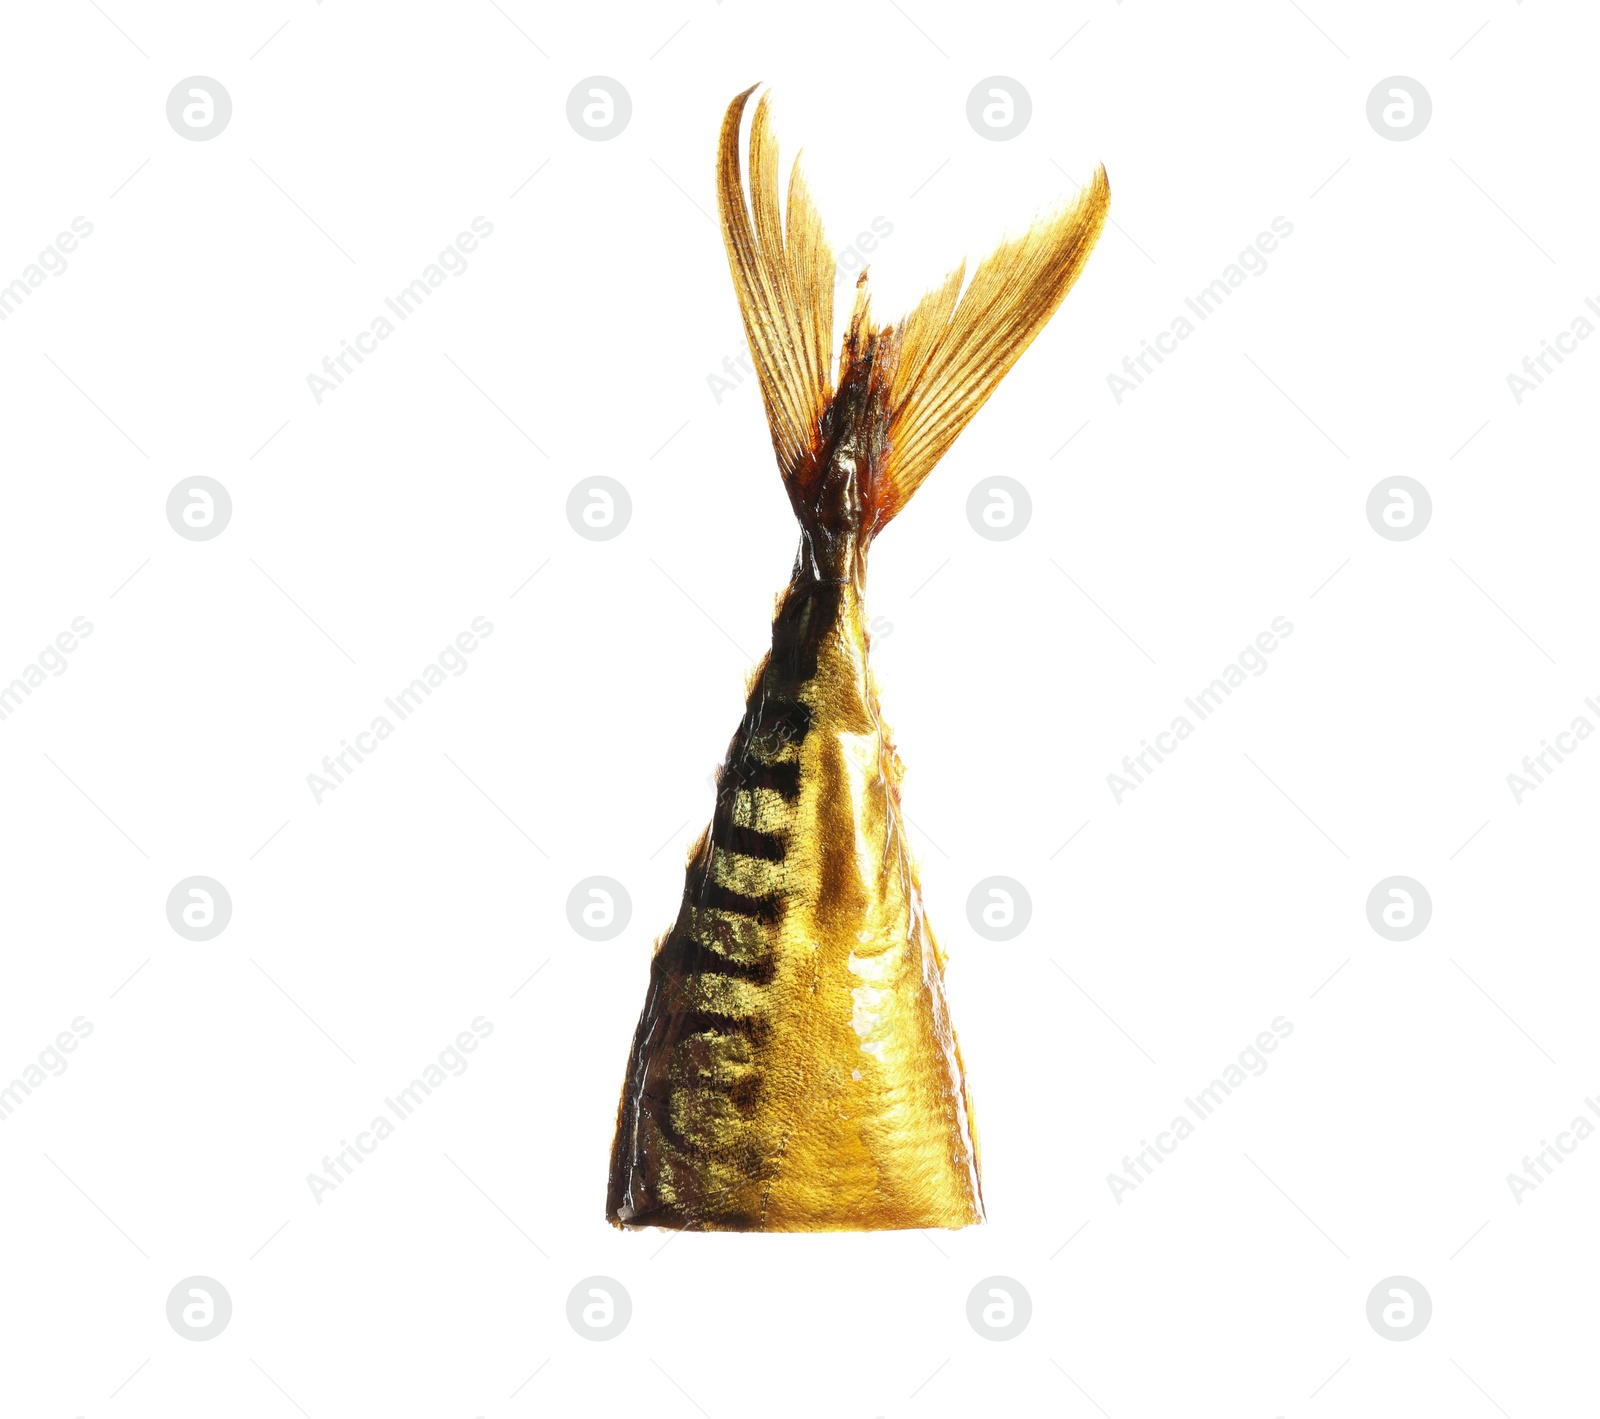 Photo of Tail of tasty smoked fish isolated on white